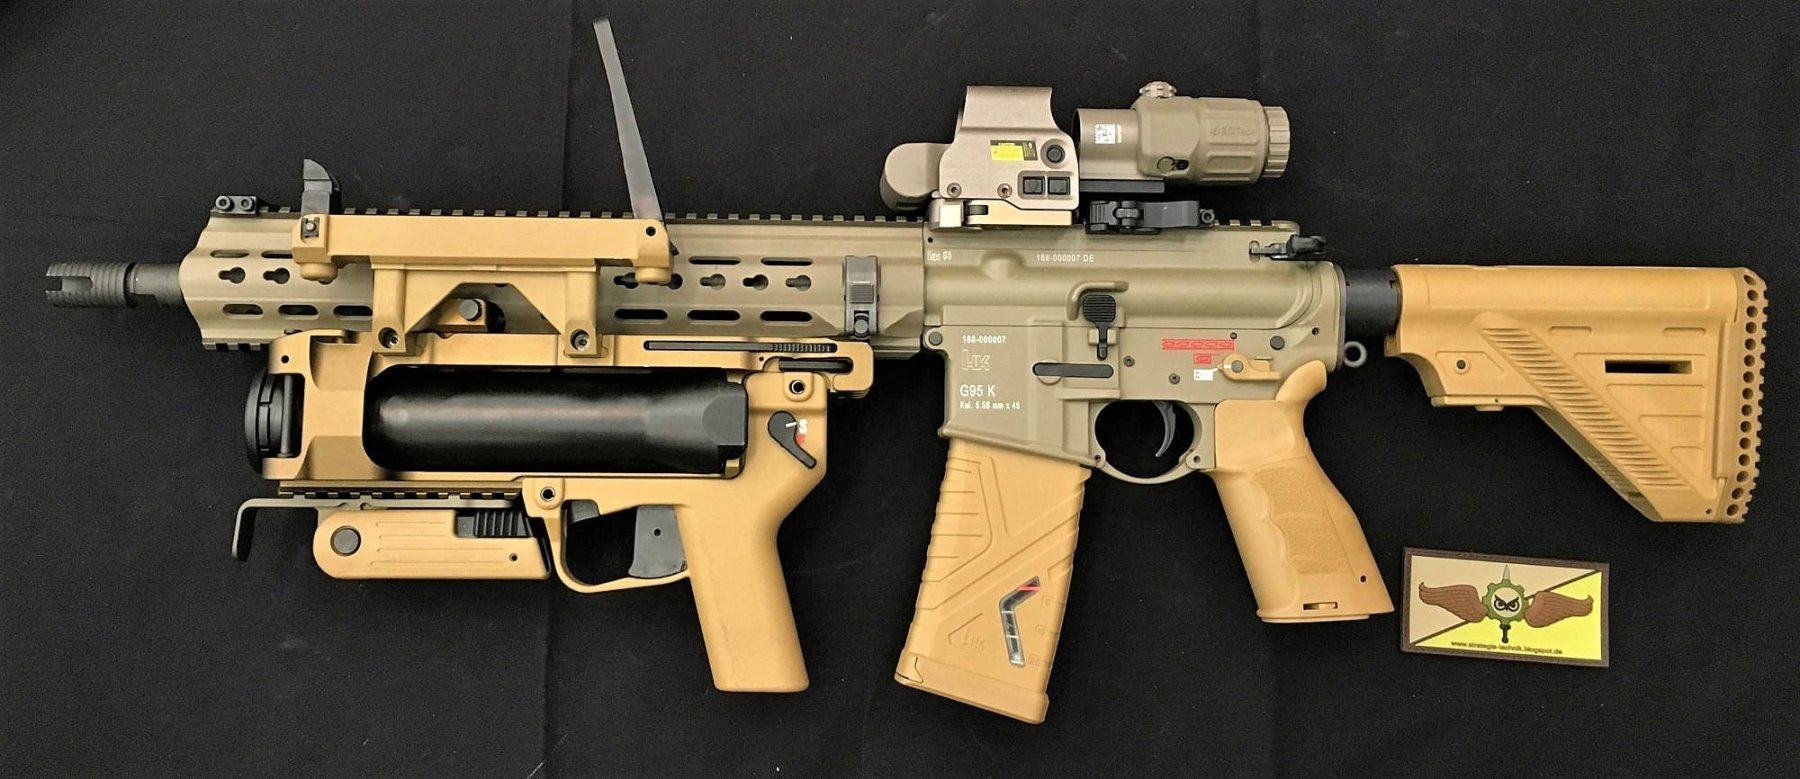 G95k with 40mm grenade launcher module and EoTech sights supplied by I-E-A-Mil Optics